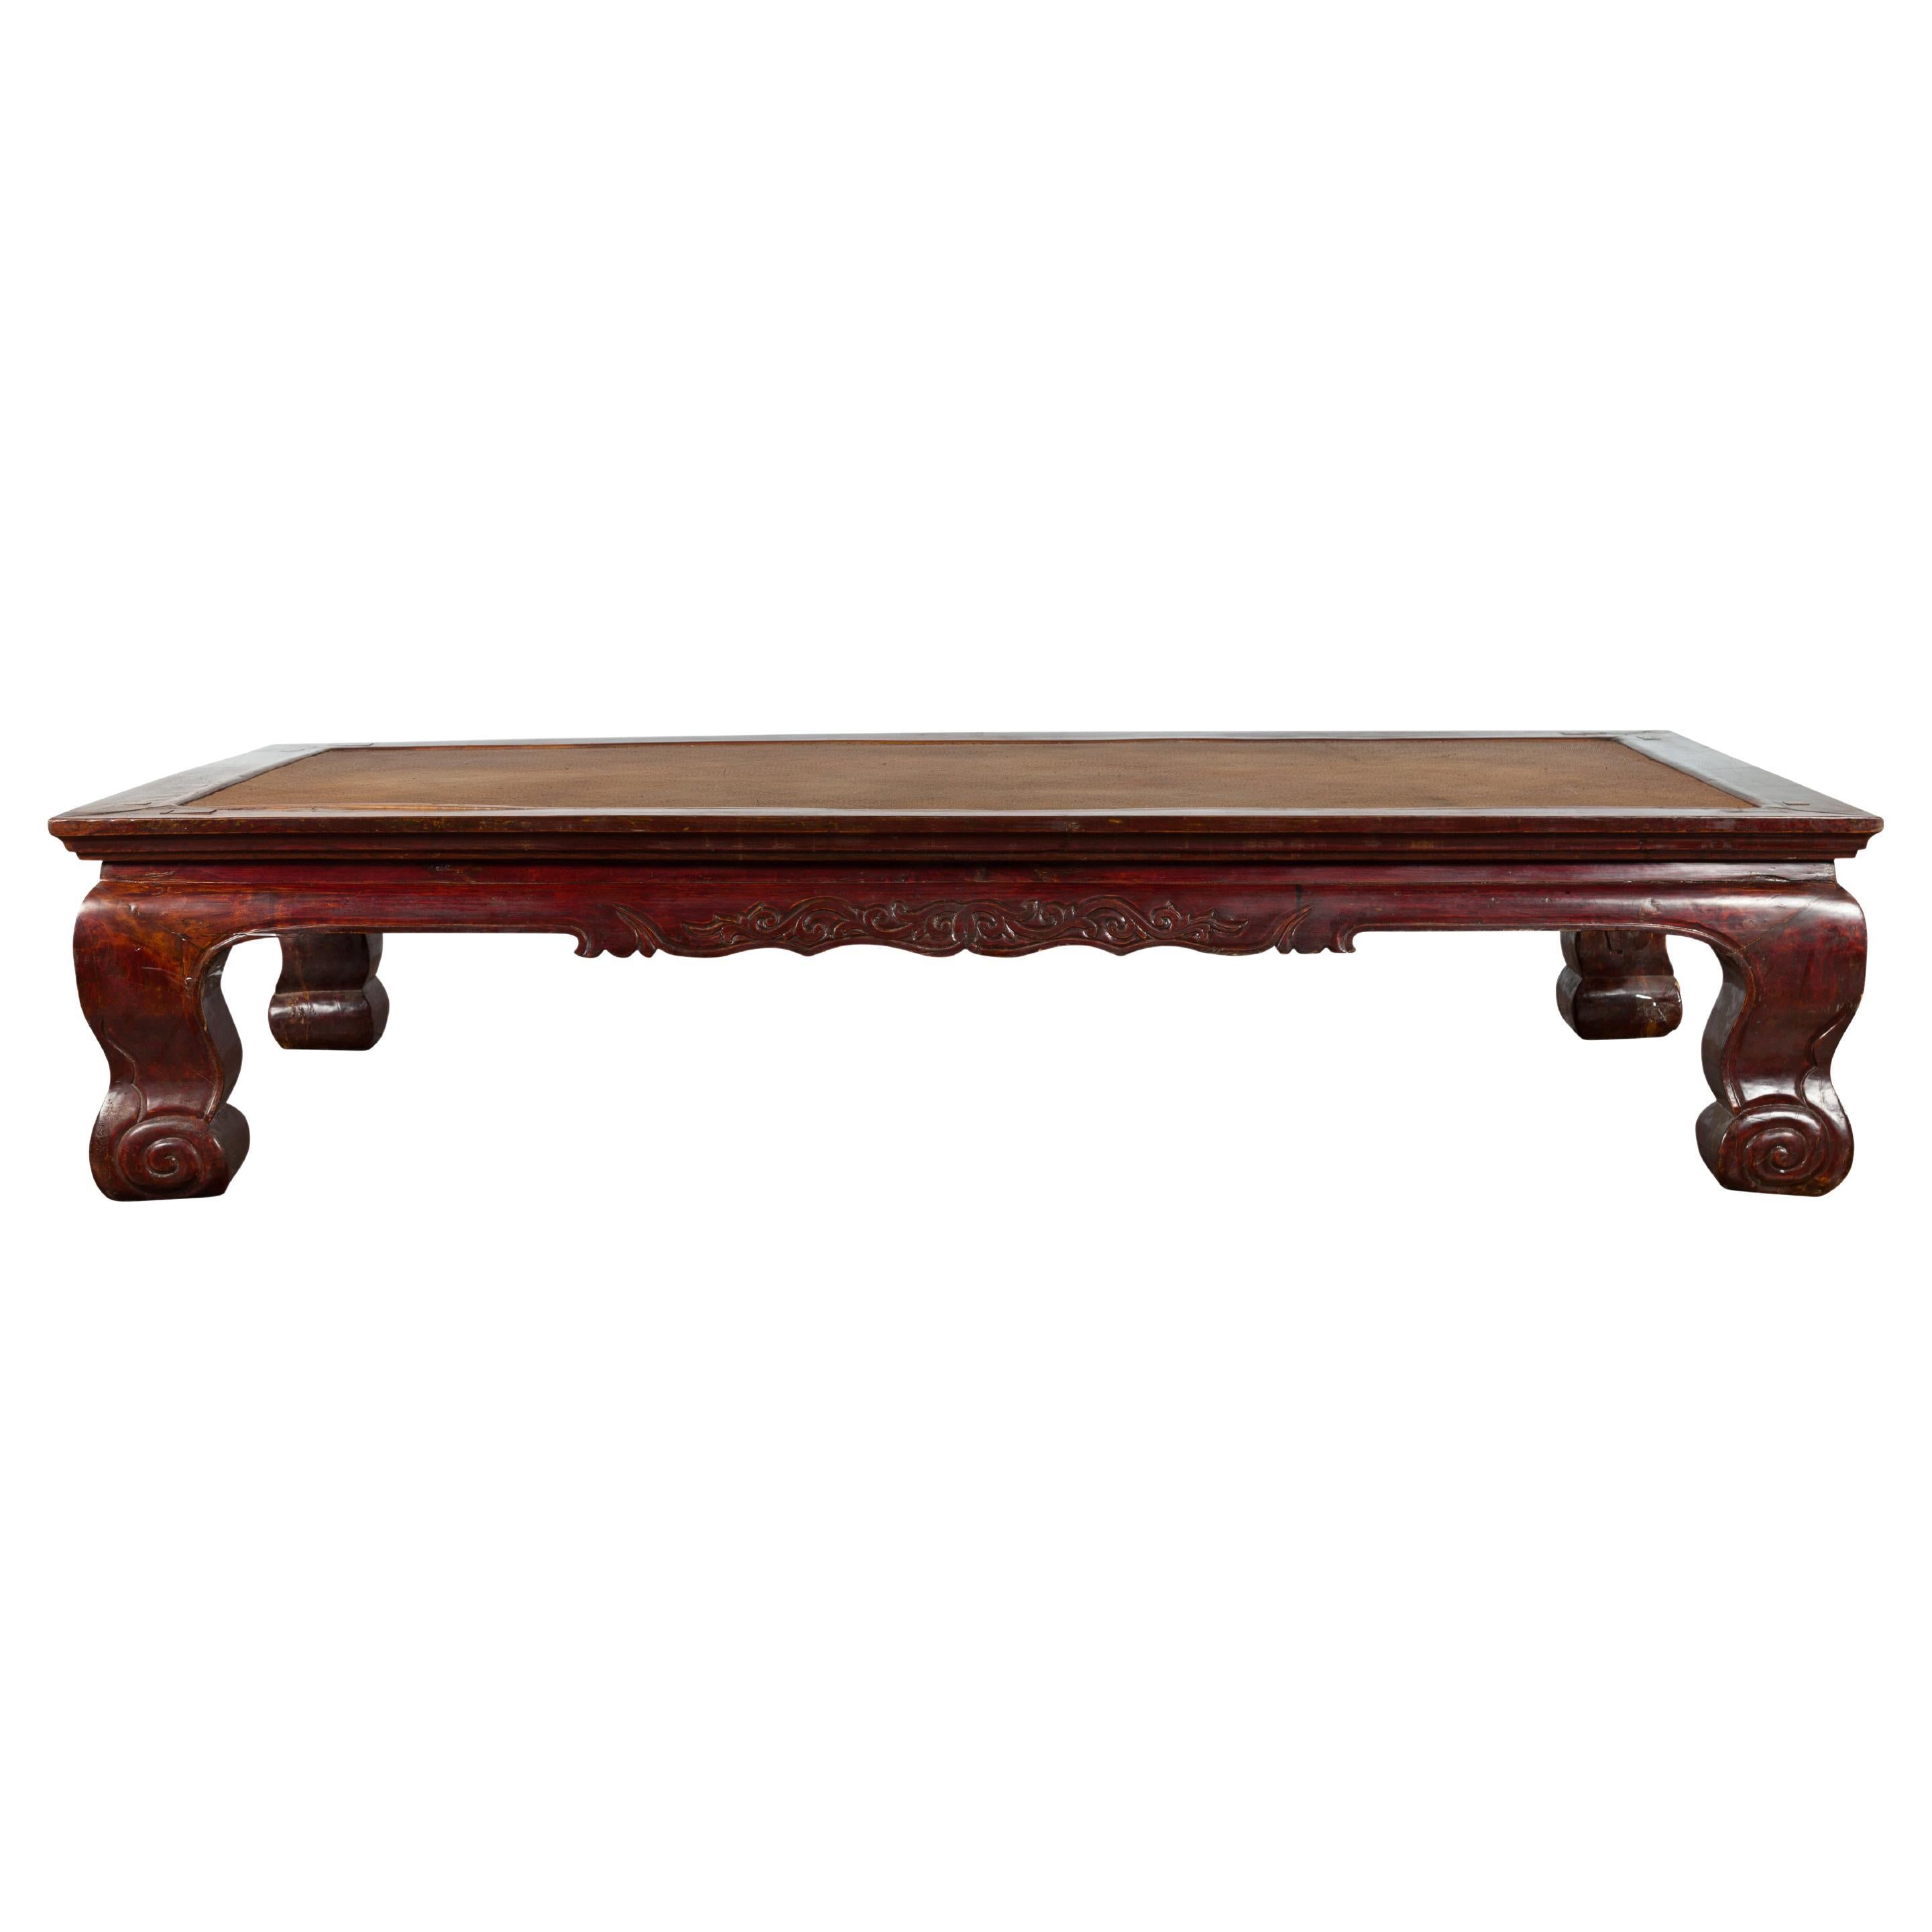 Chinese Qing Dynasty 19th Century Mahogany Stained Coffee Table with Rattan Top